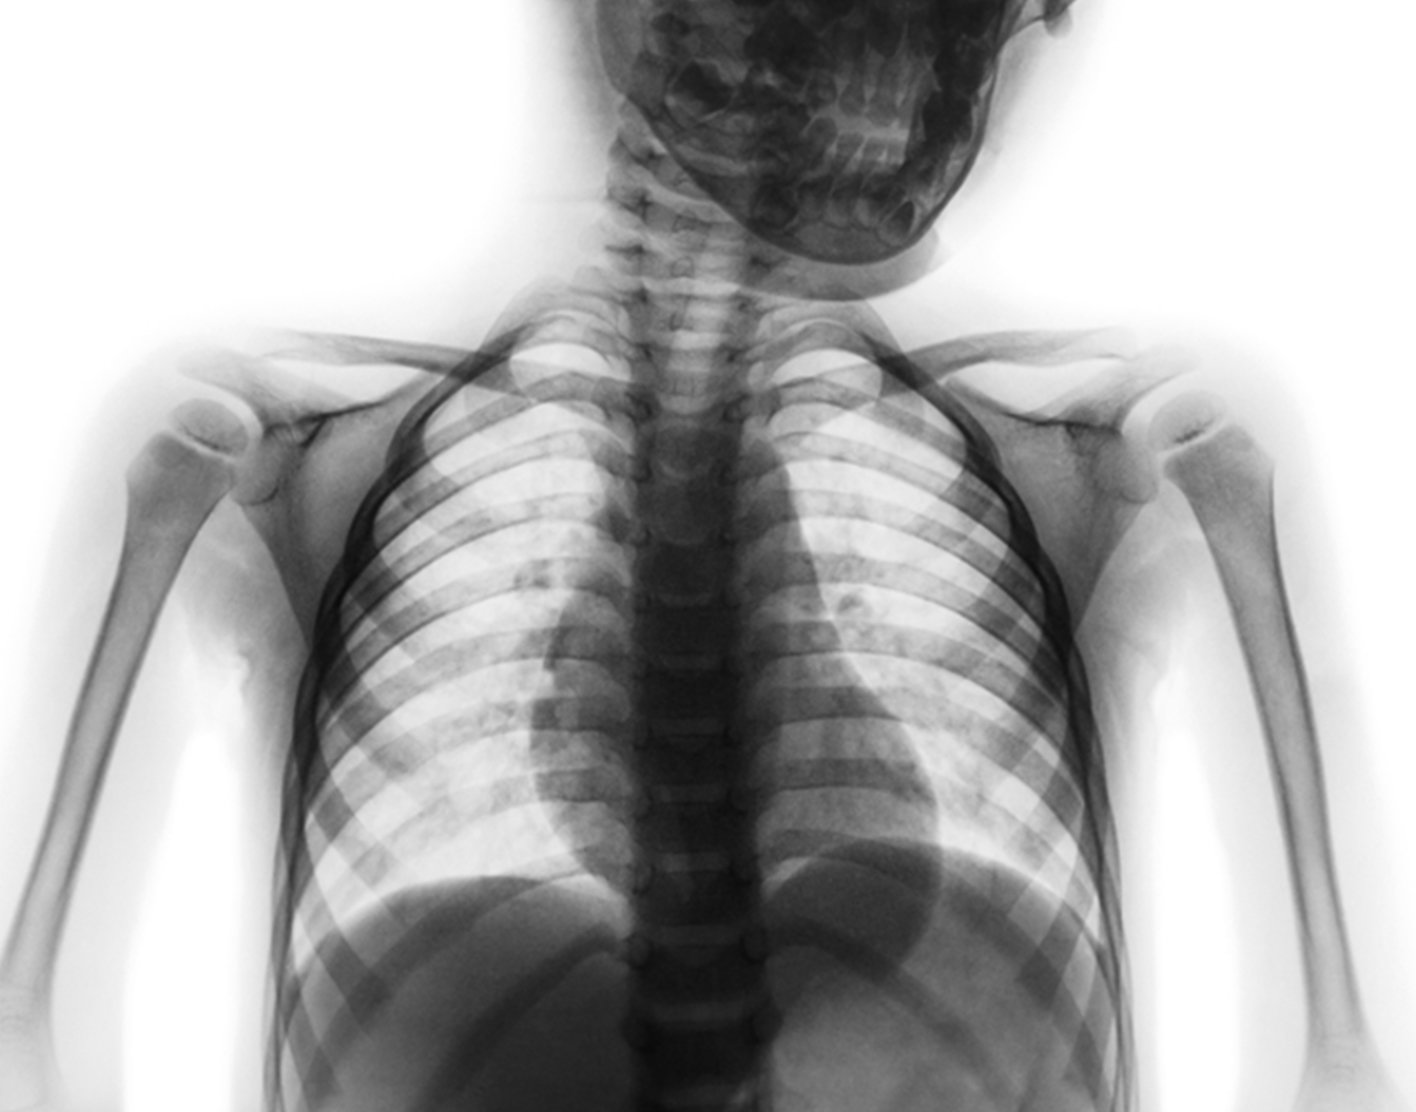 https://www.ucsfbenioffchildrens.org/-/media/project/ucsf/ucsf-bch/images/medical-tests/hero/thoracic-spine-x-ray-708x556-2x.jpg